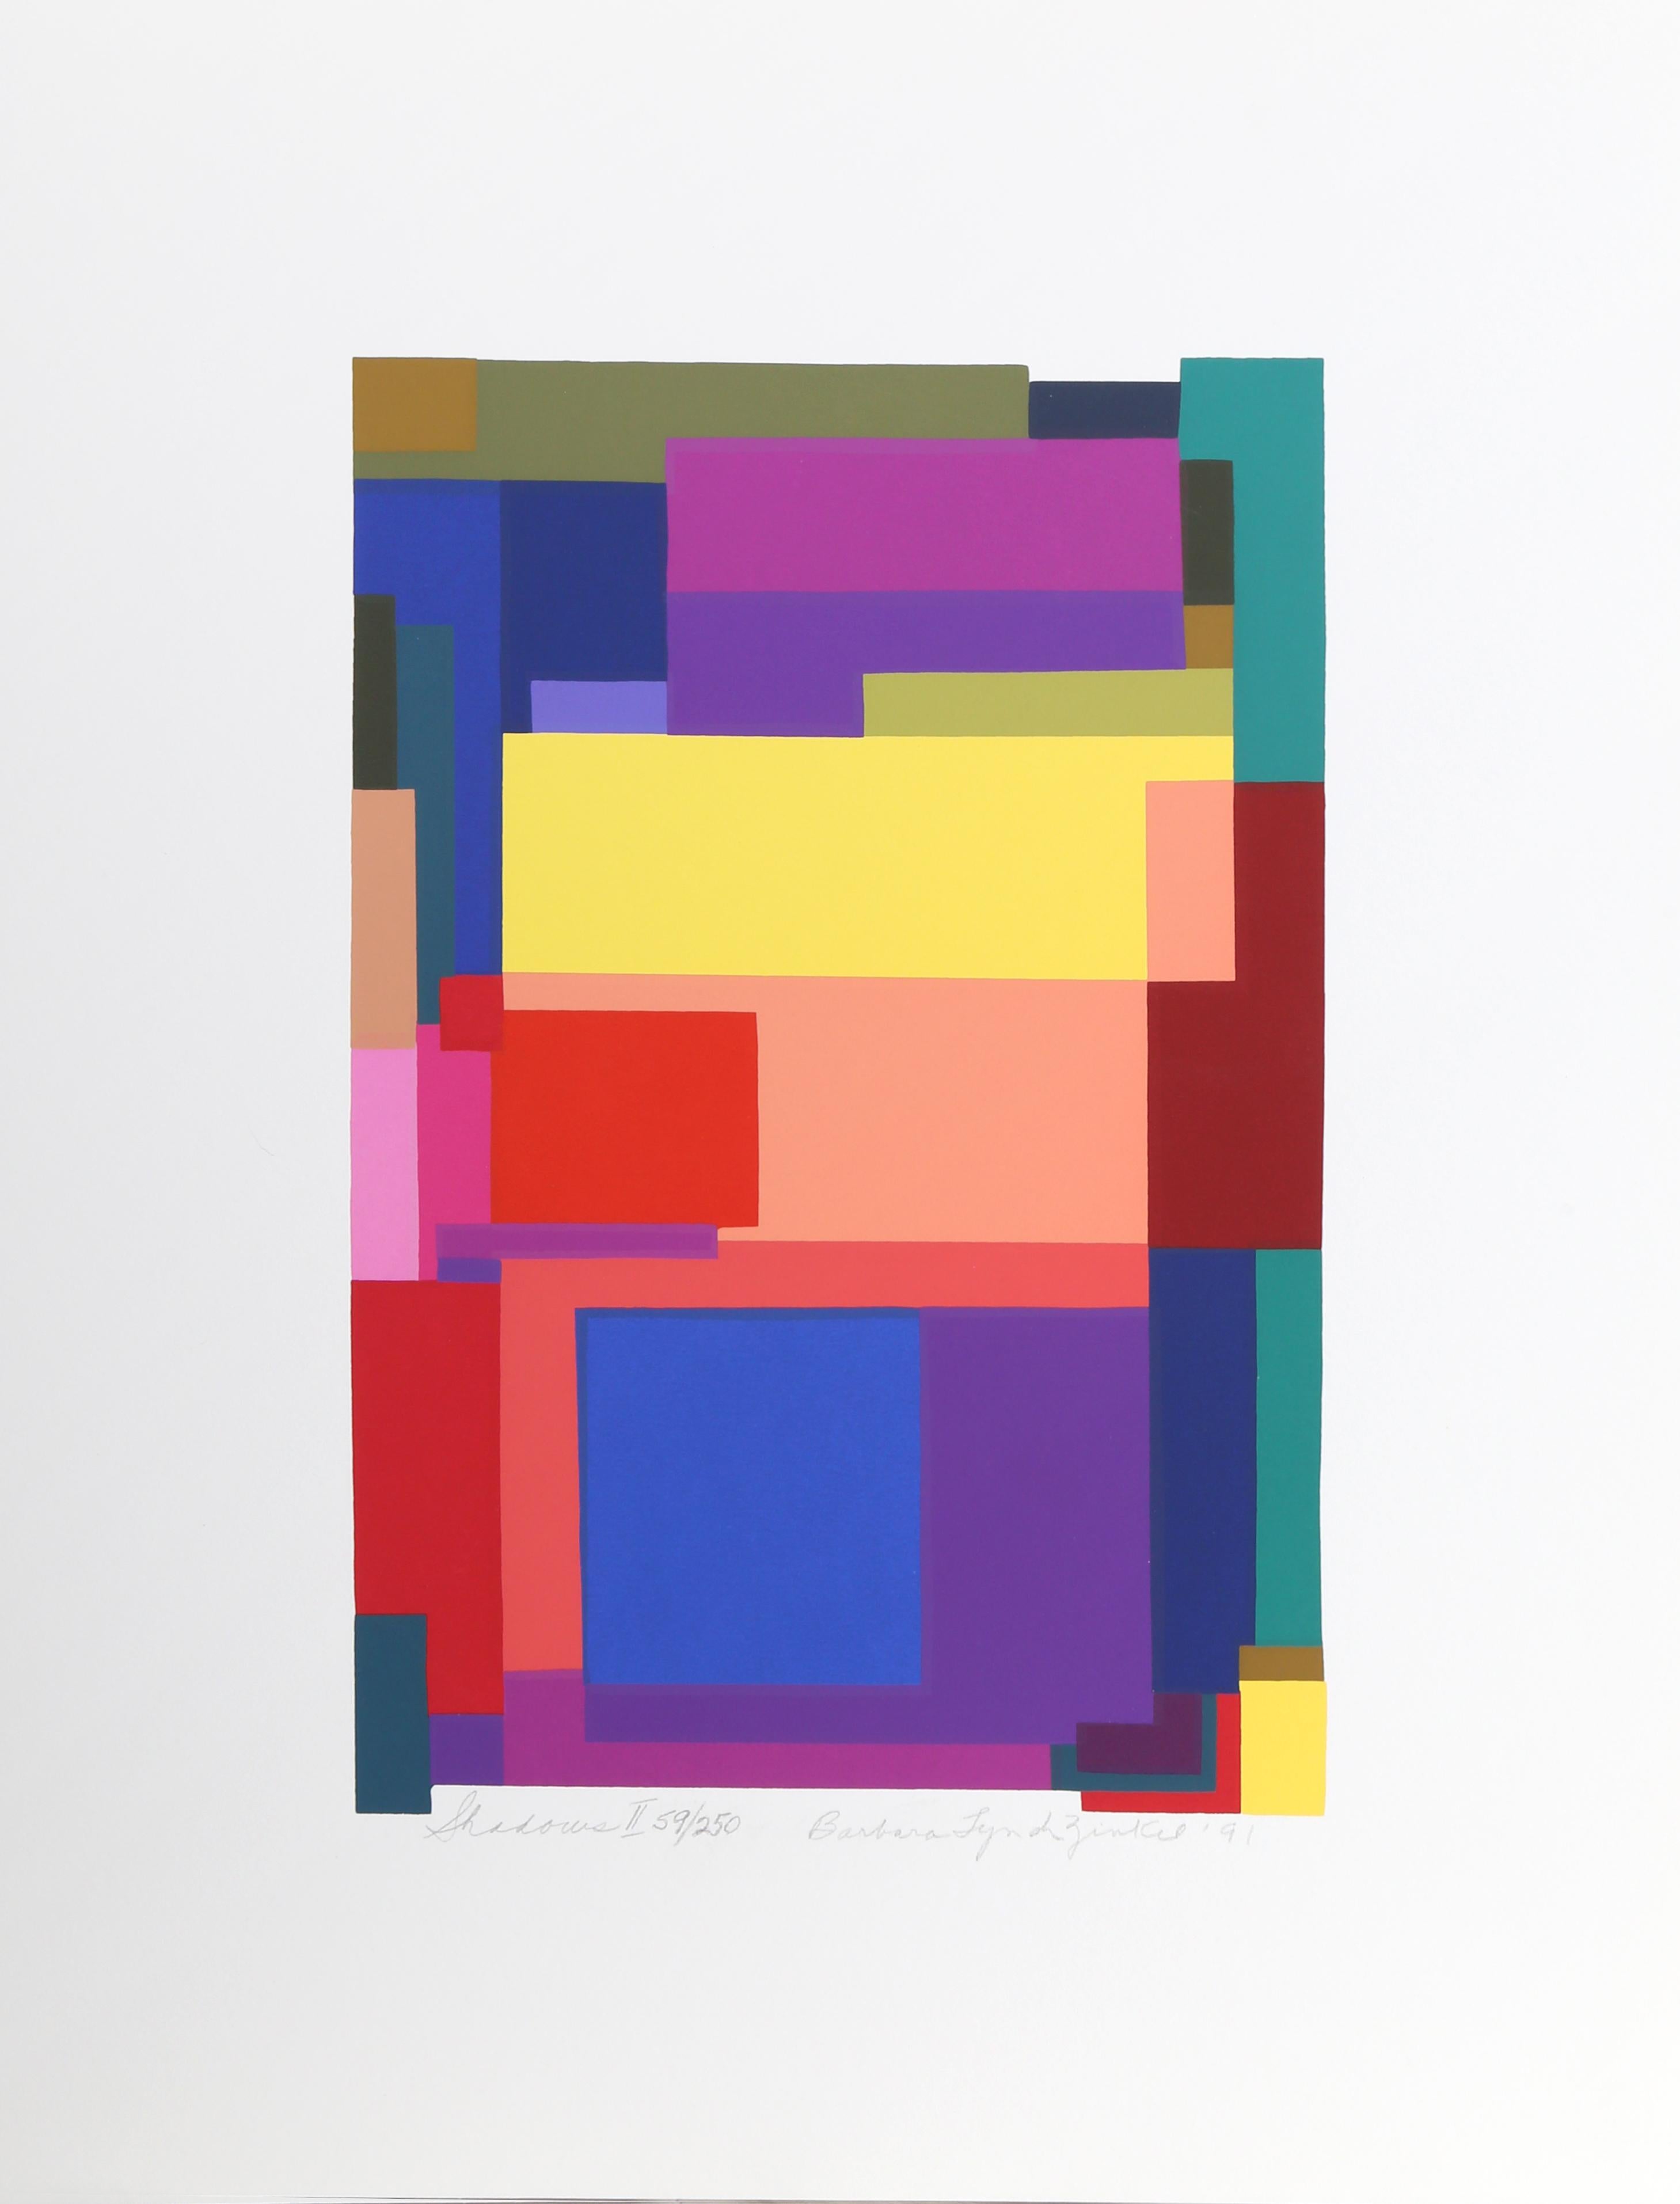 A colorful geometric screenprint by American artist Barbara Lynch Zinkel, signed and numbered in pencil.

Date: 1991
Medium: Screenprint, signed, numbered, dated and titled in pencil
Edition: 250
Image Size: 12 x 7.5 inches
Size : 16 x 10 in. (40.64